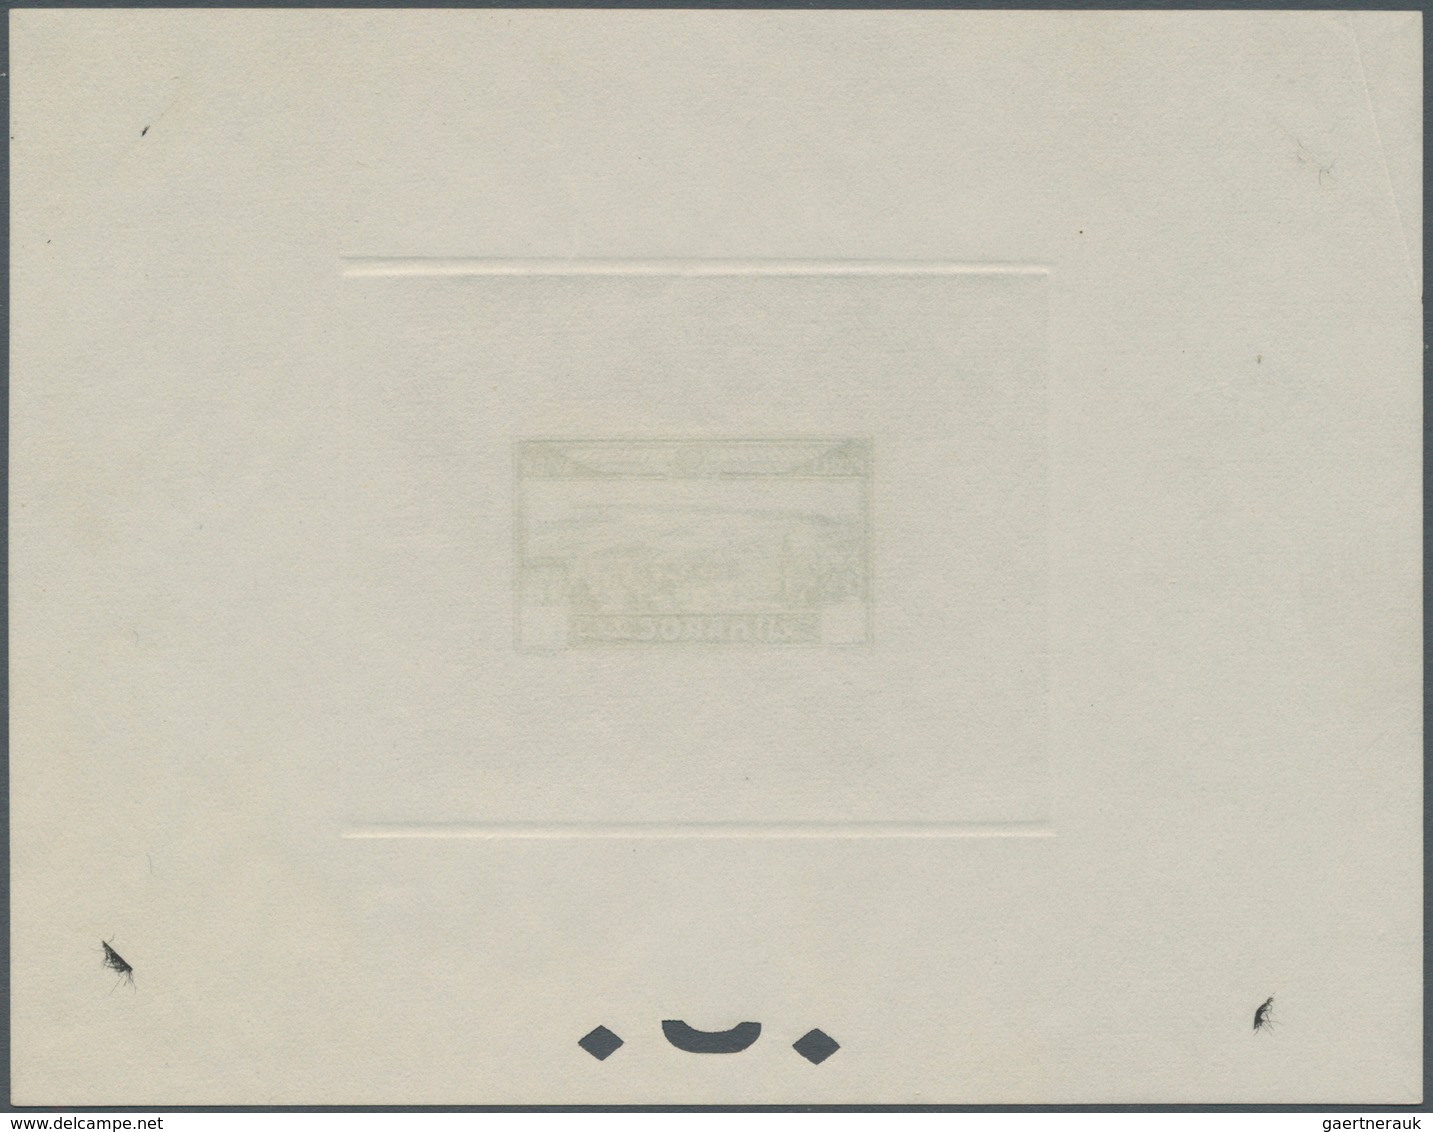 Marokko: 1933, Airmails "View of Casablanca", five epreuve in issued design but without value, colou